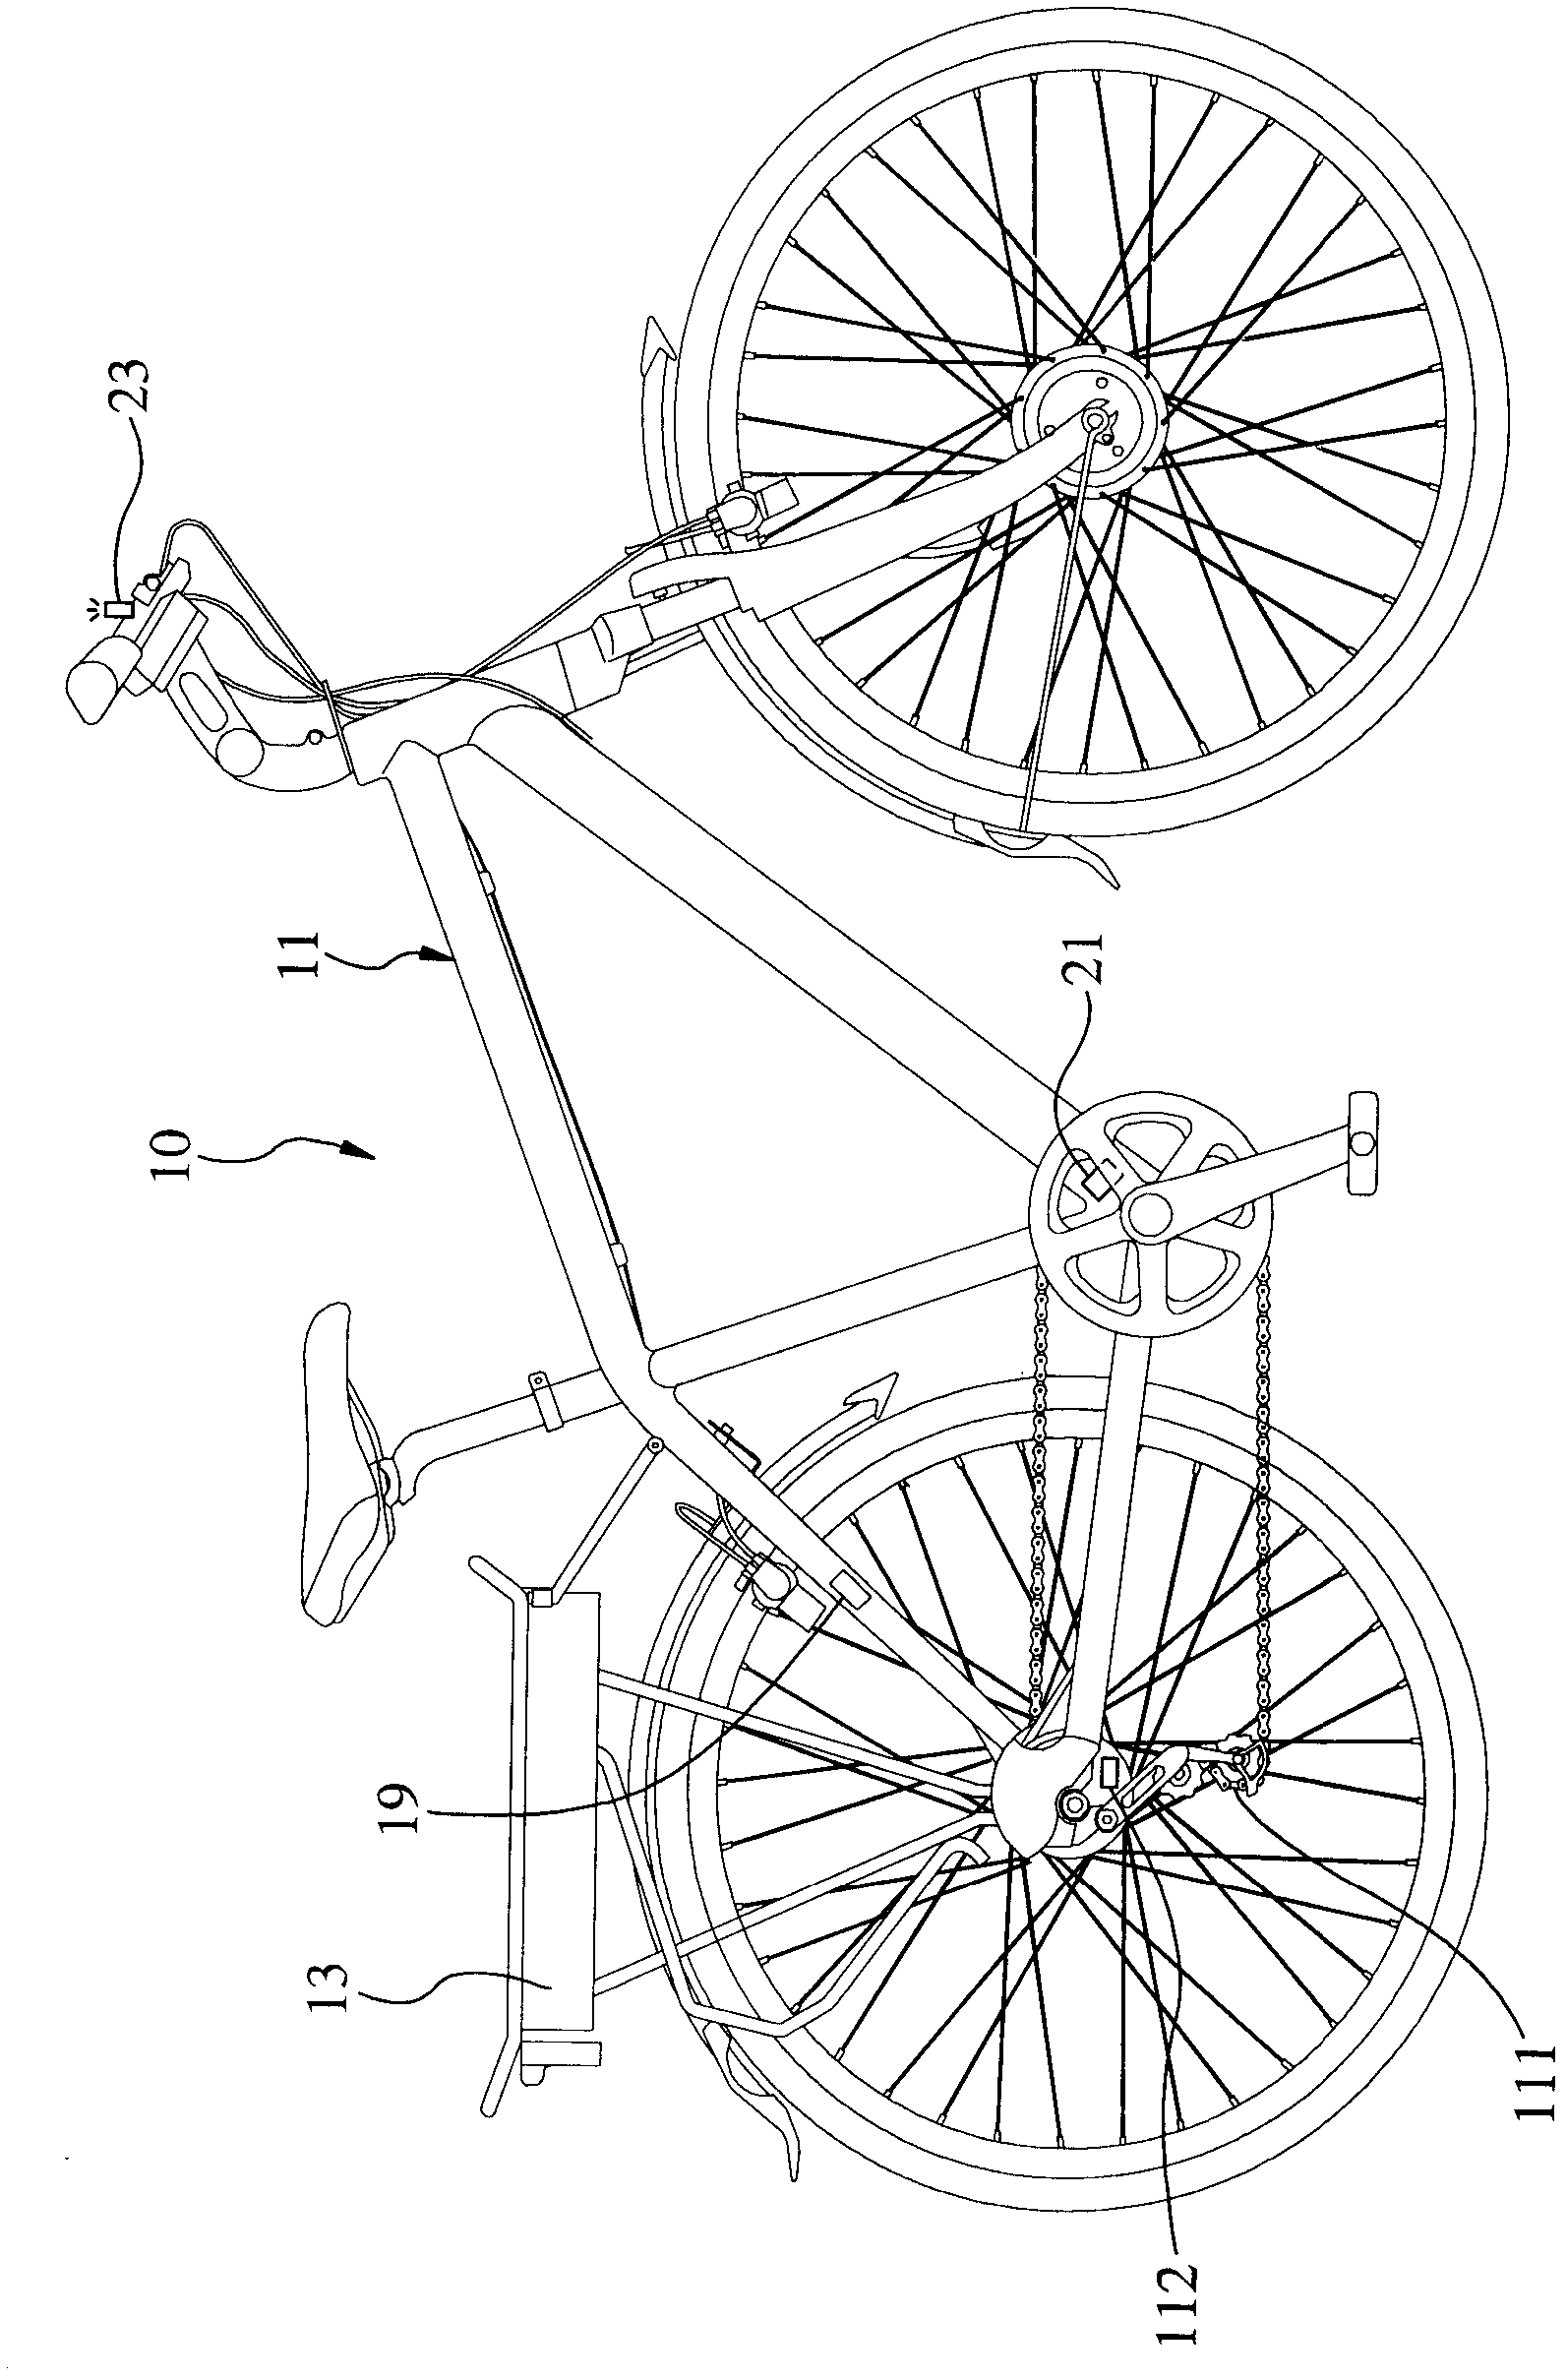 Variable-speed bicycle capable of identifying unusual conditions and identifying method of bicycle